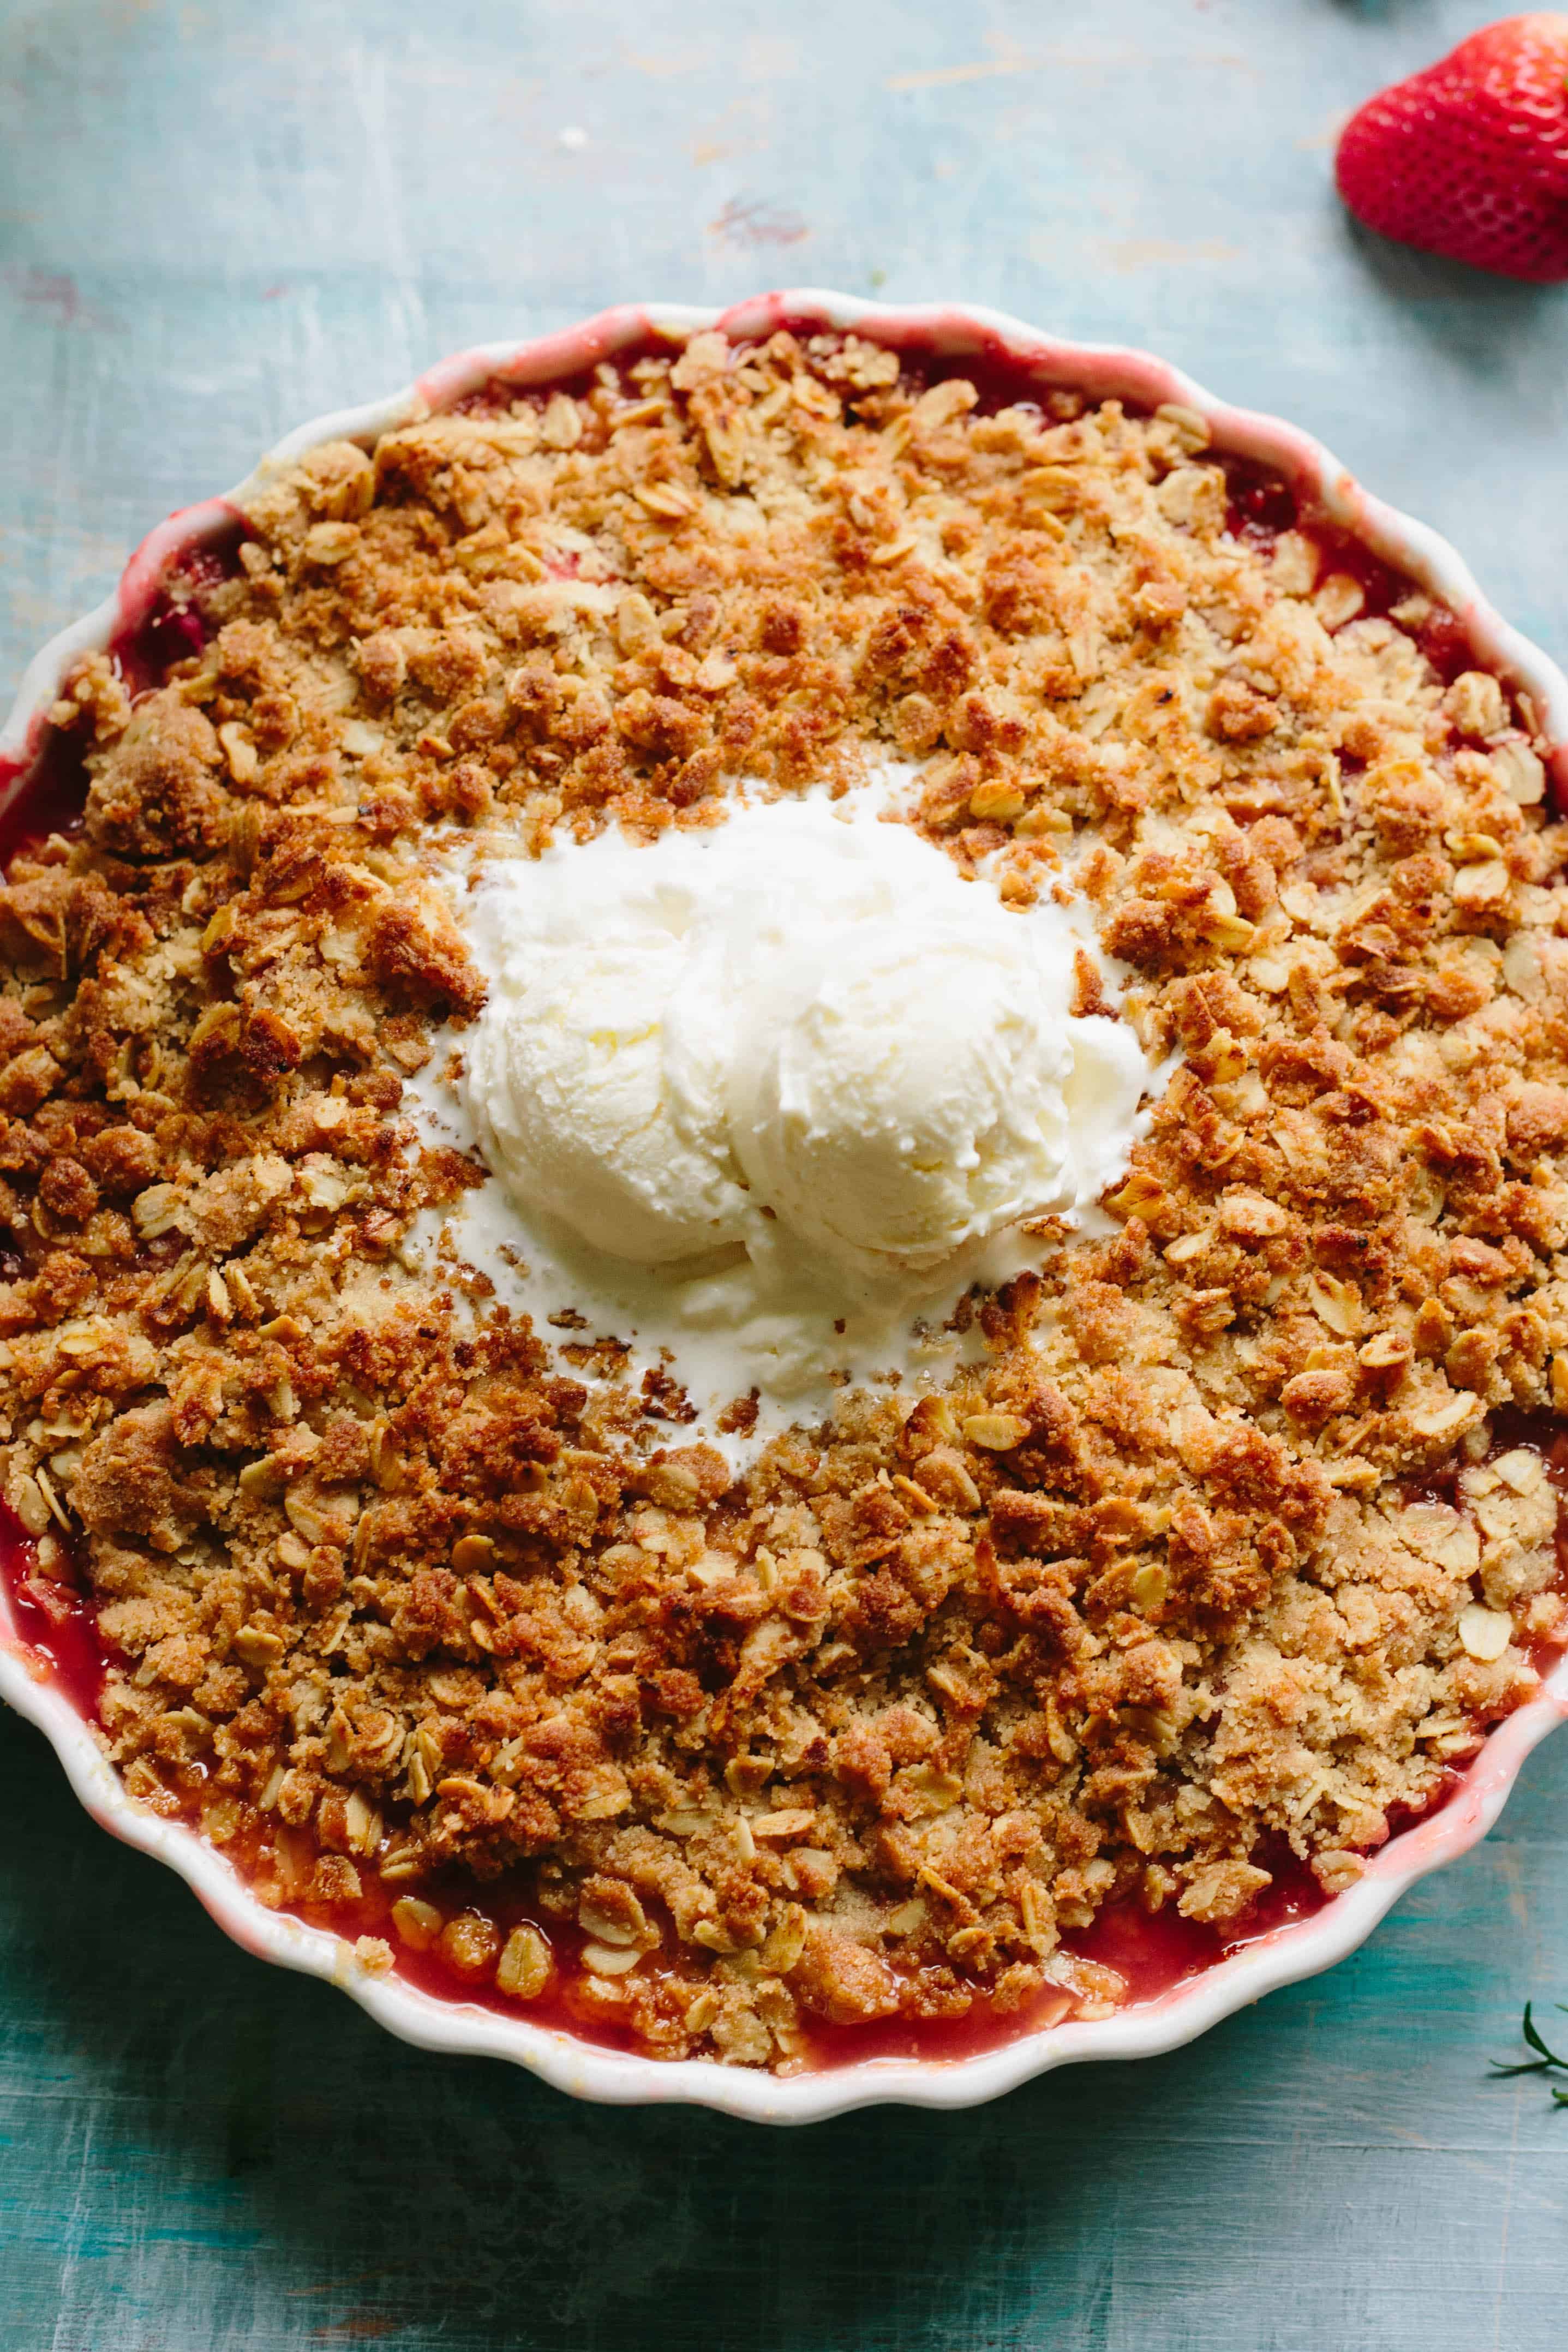 Two scoops of vanilla ice cream melting into the top of a strawberry rhubarb with apricot crisp.